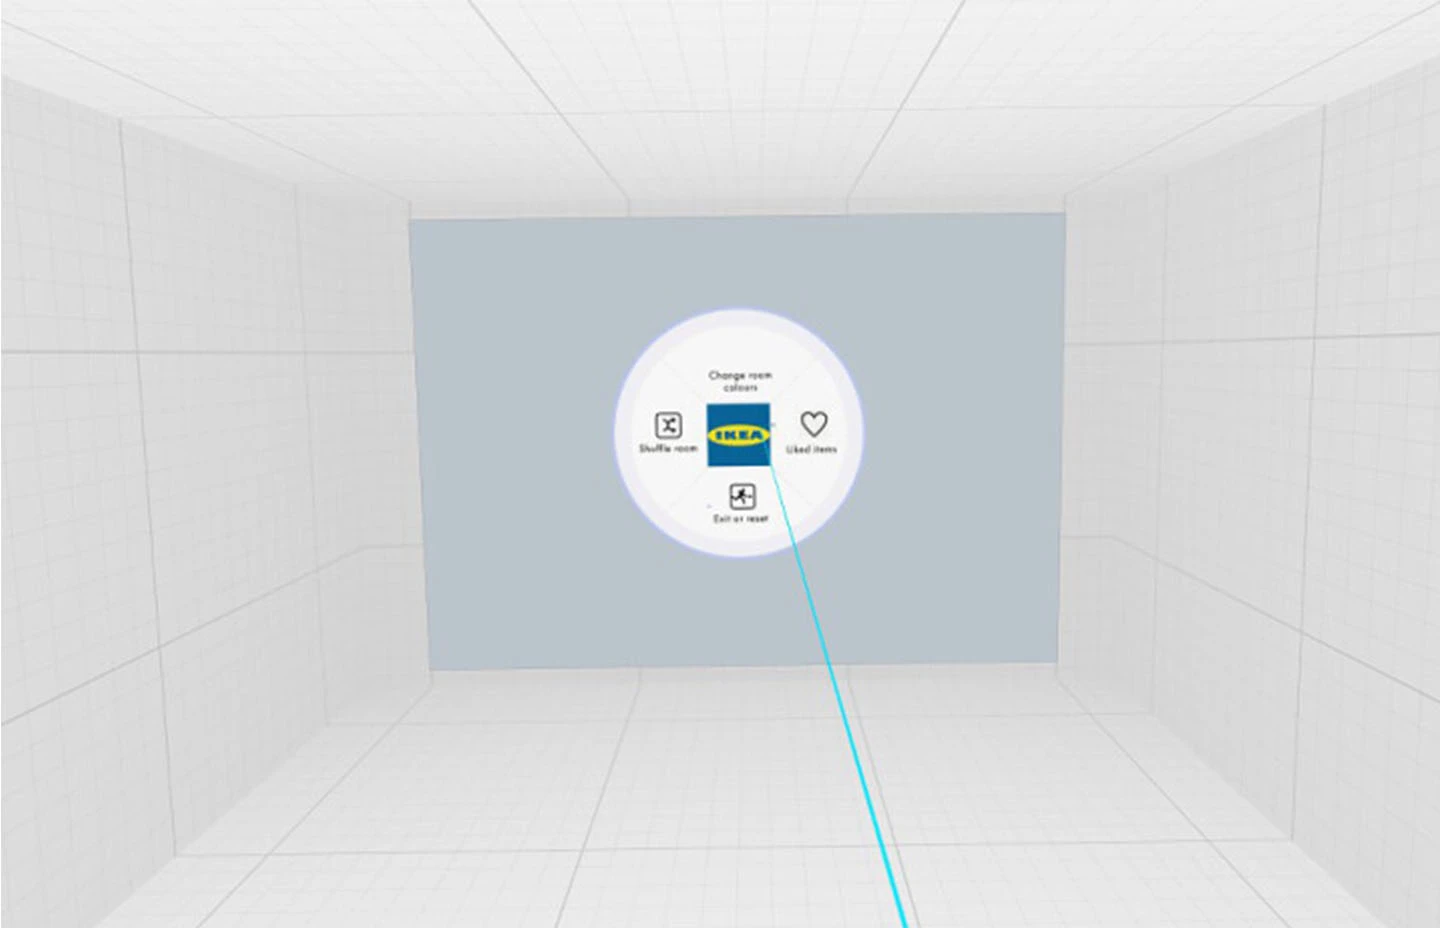 Virtual environment with controller picking from a game menu branded for IKEA